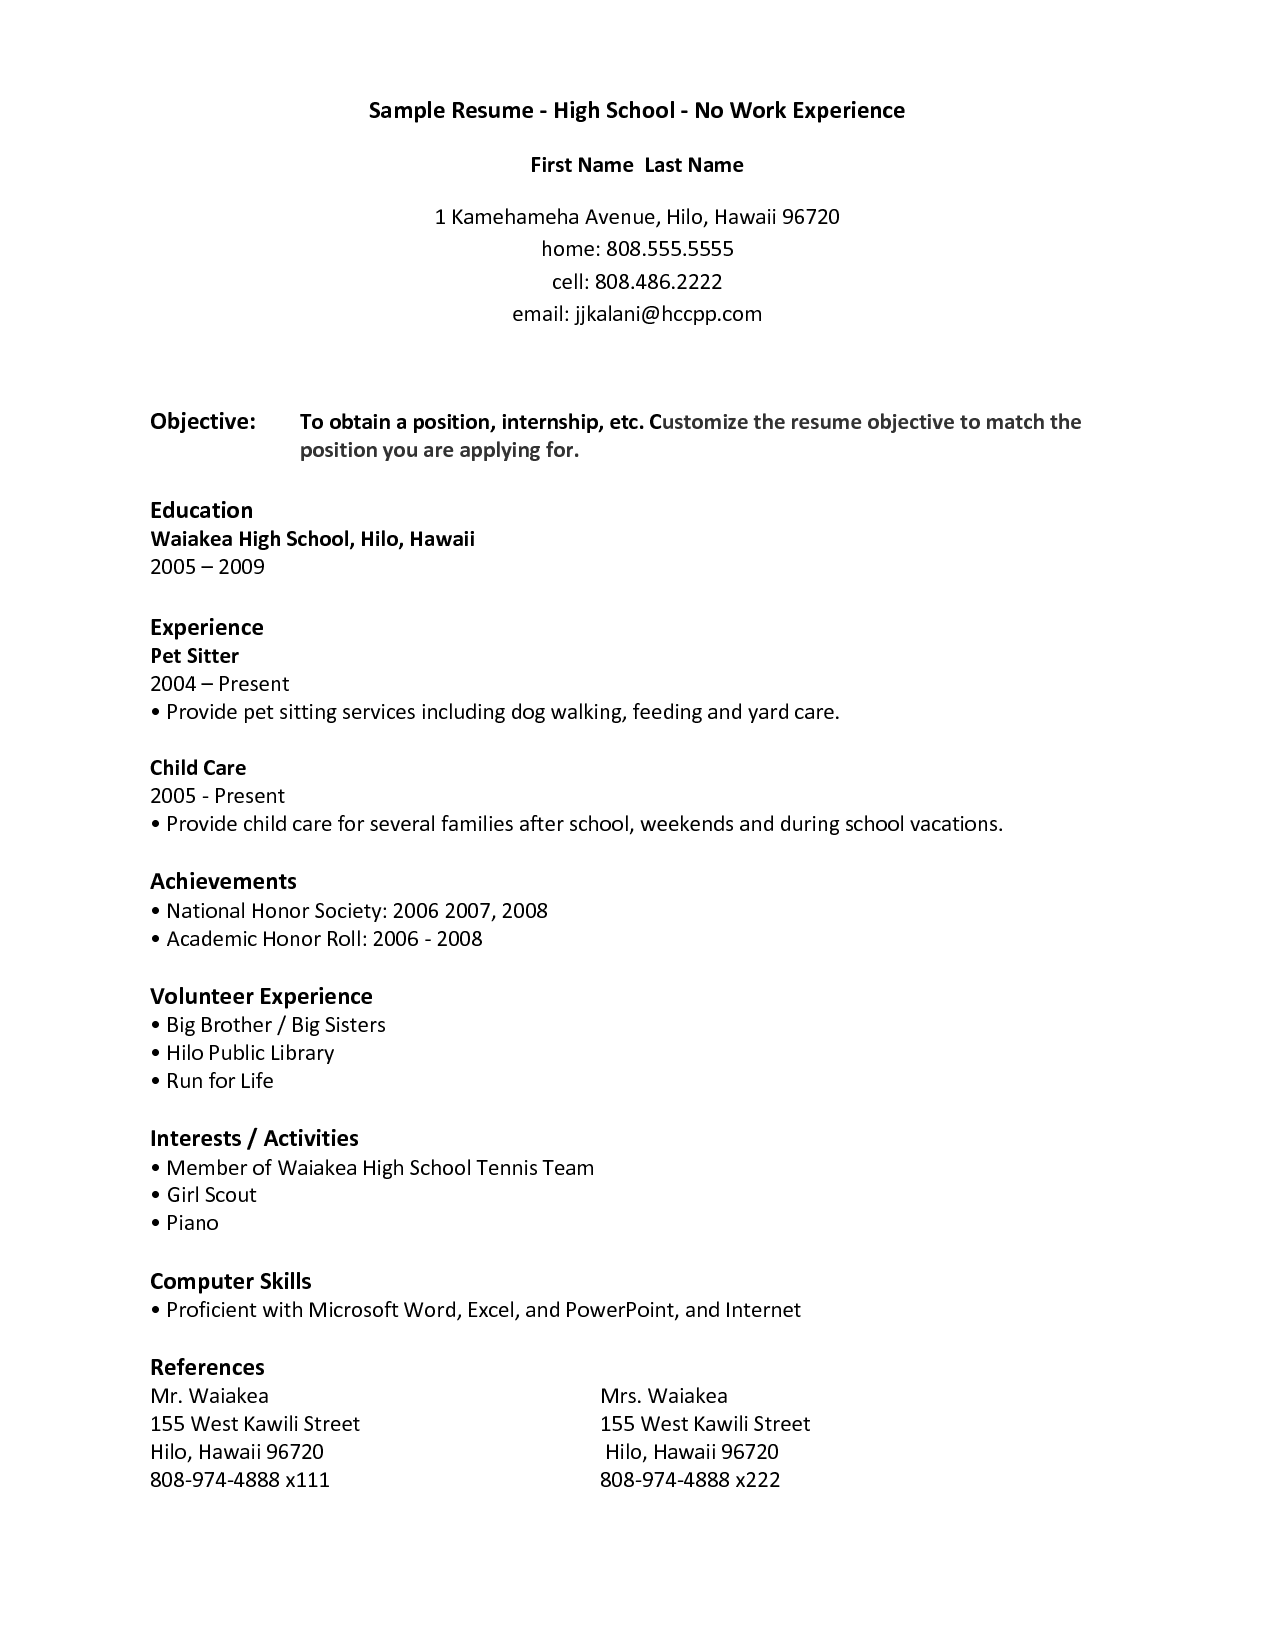 Resume Examples Little Work Experience 